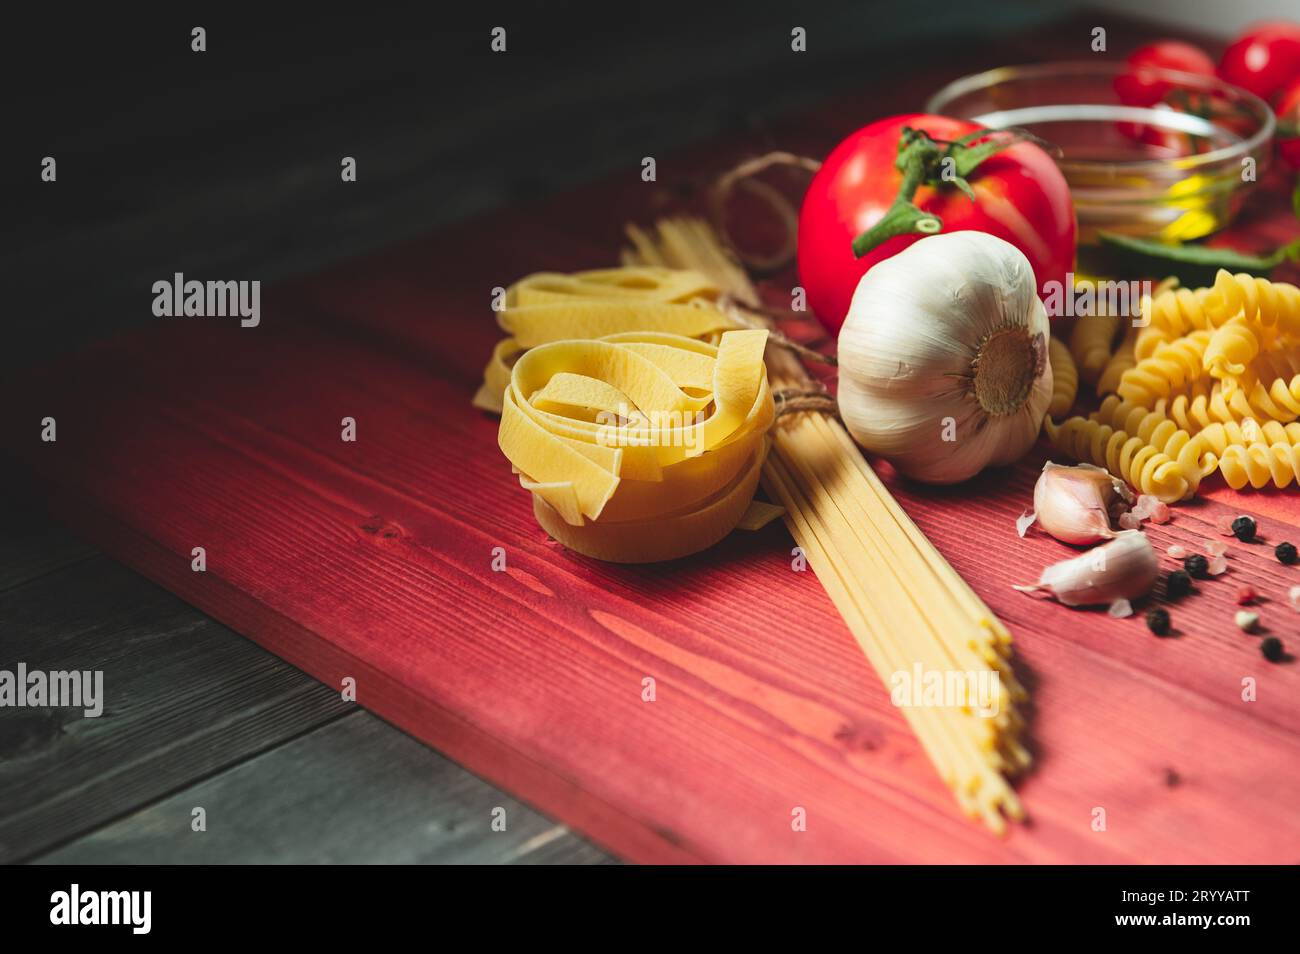 Tasty appetizing italian spaghetti pasta ingredients for kitchen cuisine with tomato, cheese parmesan, olive oil, fettuccine and Stock Photo